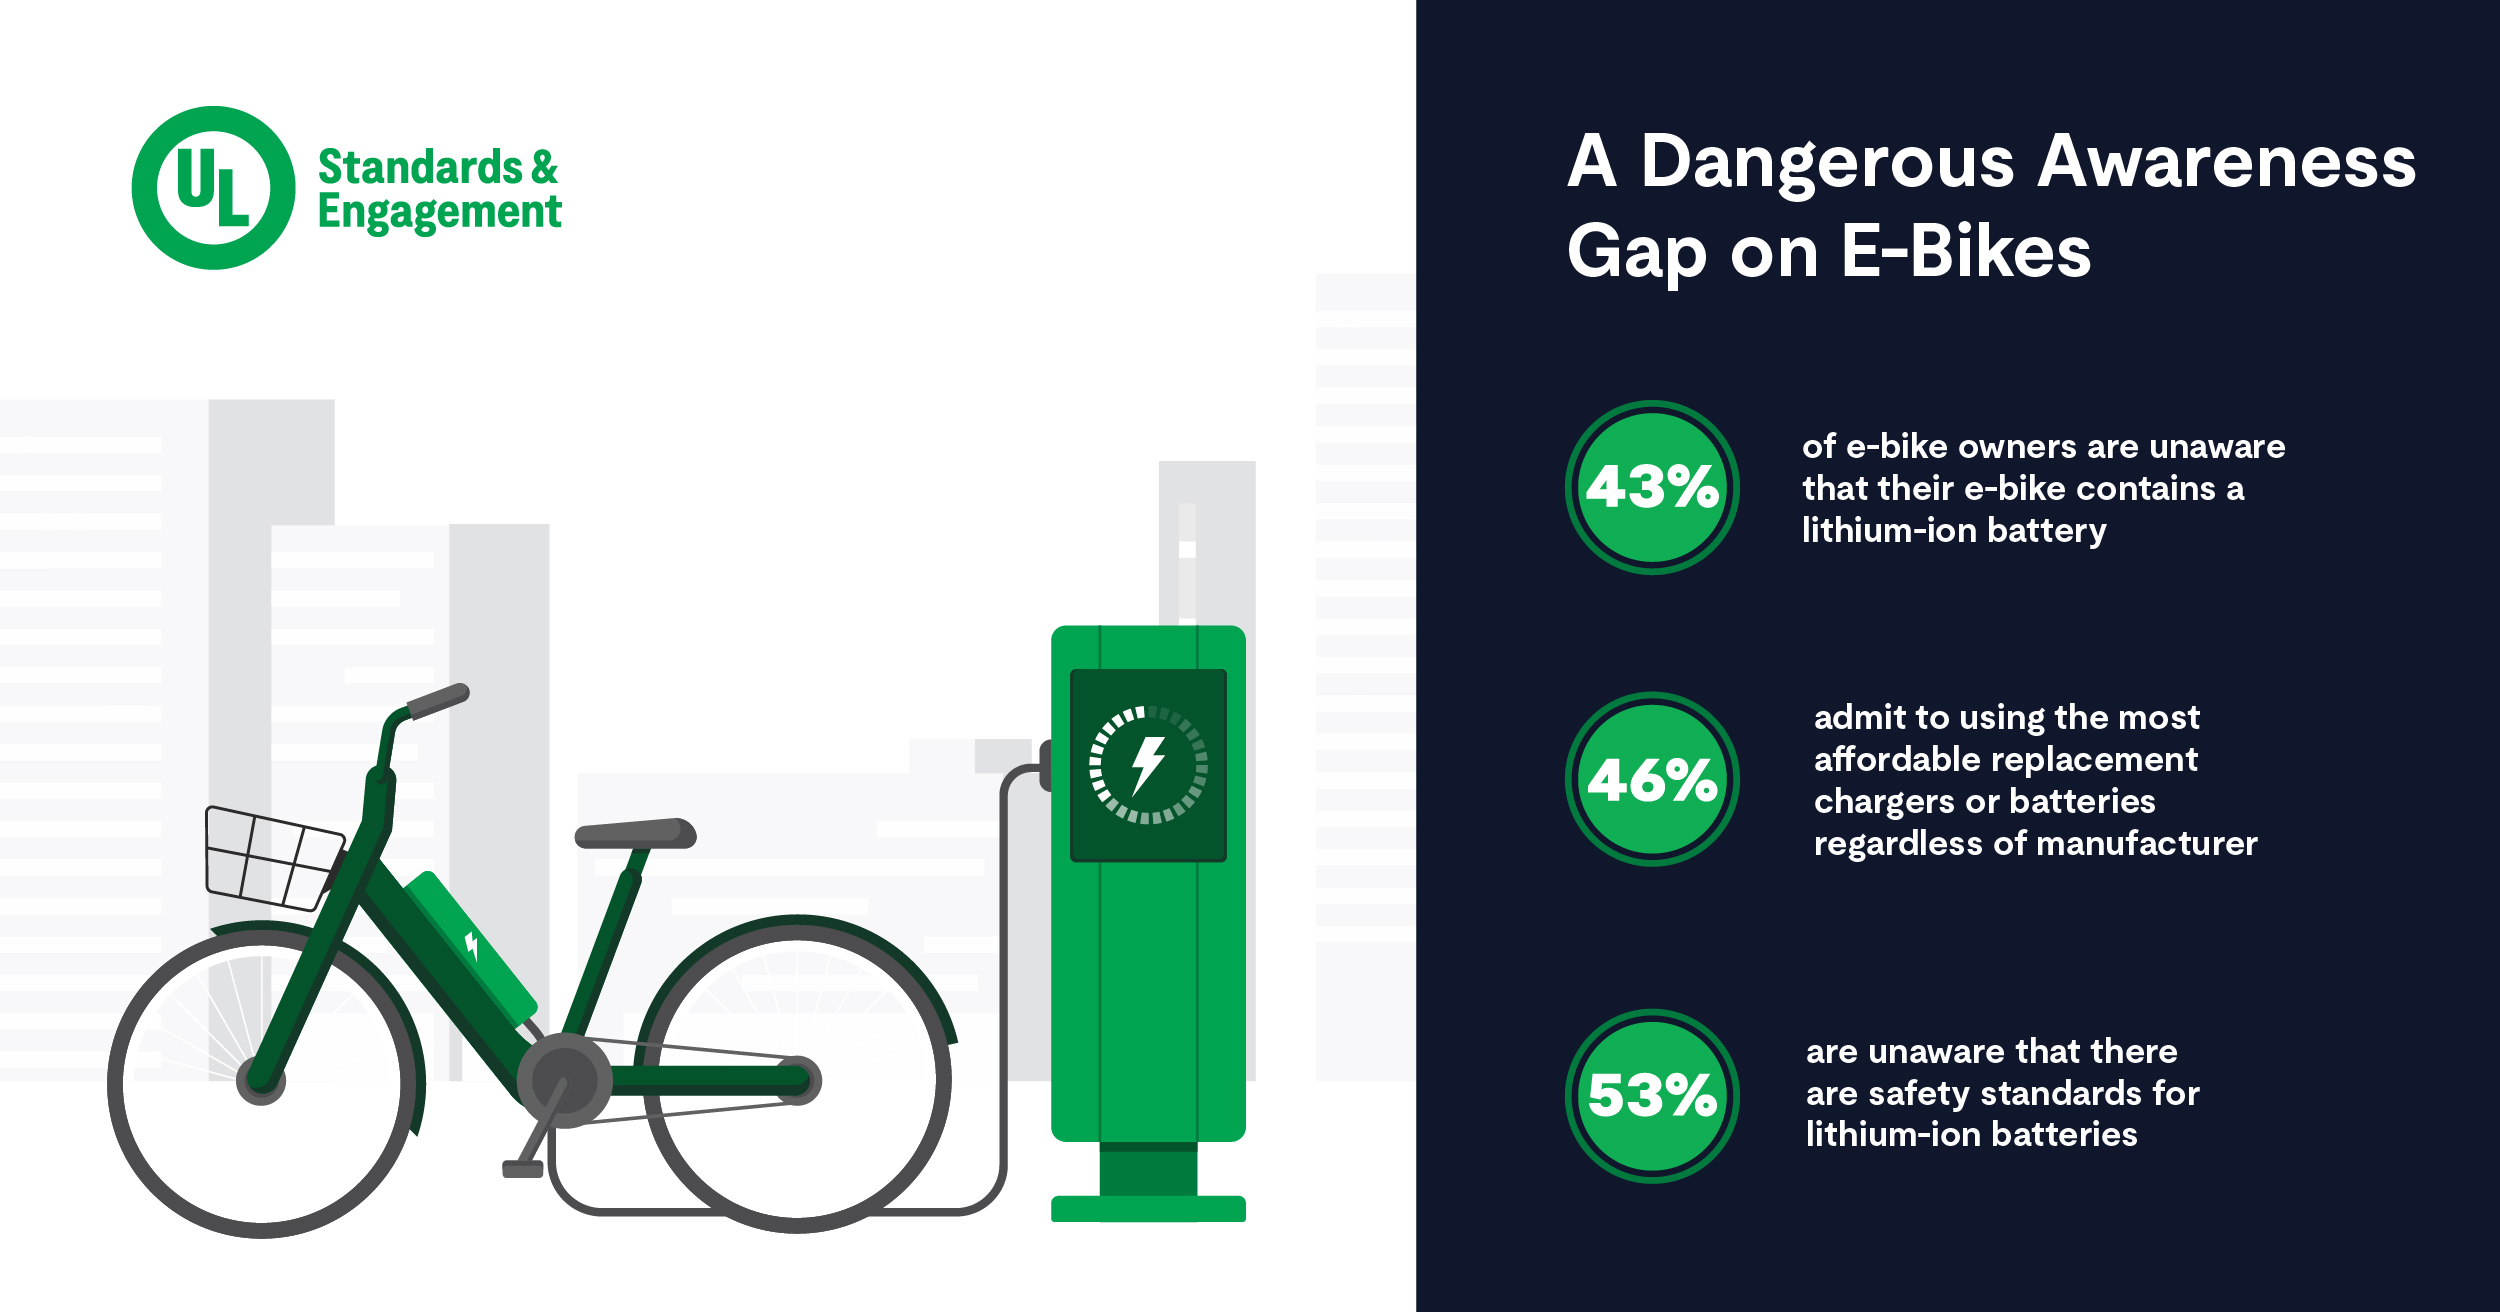 Infographic listing statistics on consumer awareness around e-bikes. 43% of e-bike owners are unaware their bikes contain lithium-ion batteries. 46% admit to using the most affordable replacement chargers or batteries regardless of manufacturer. 53% are unaware there are safety standards for lithium-ion batteries.